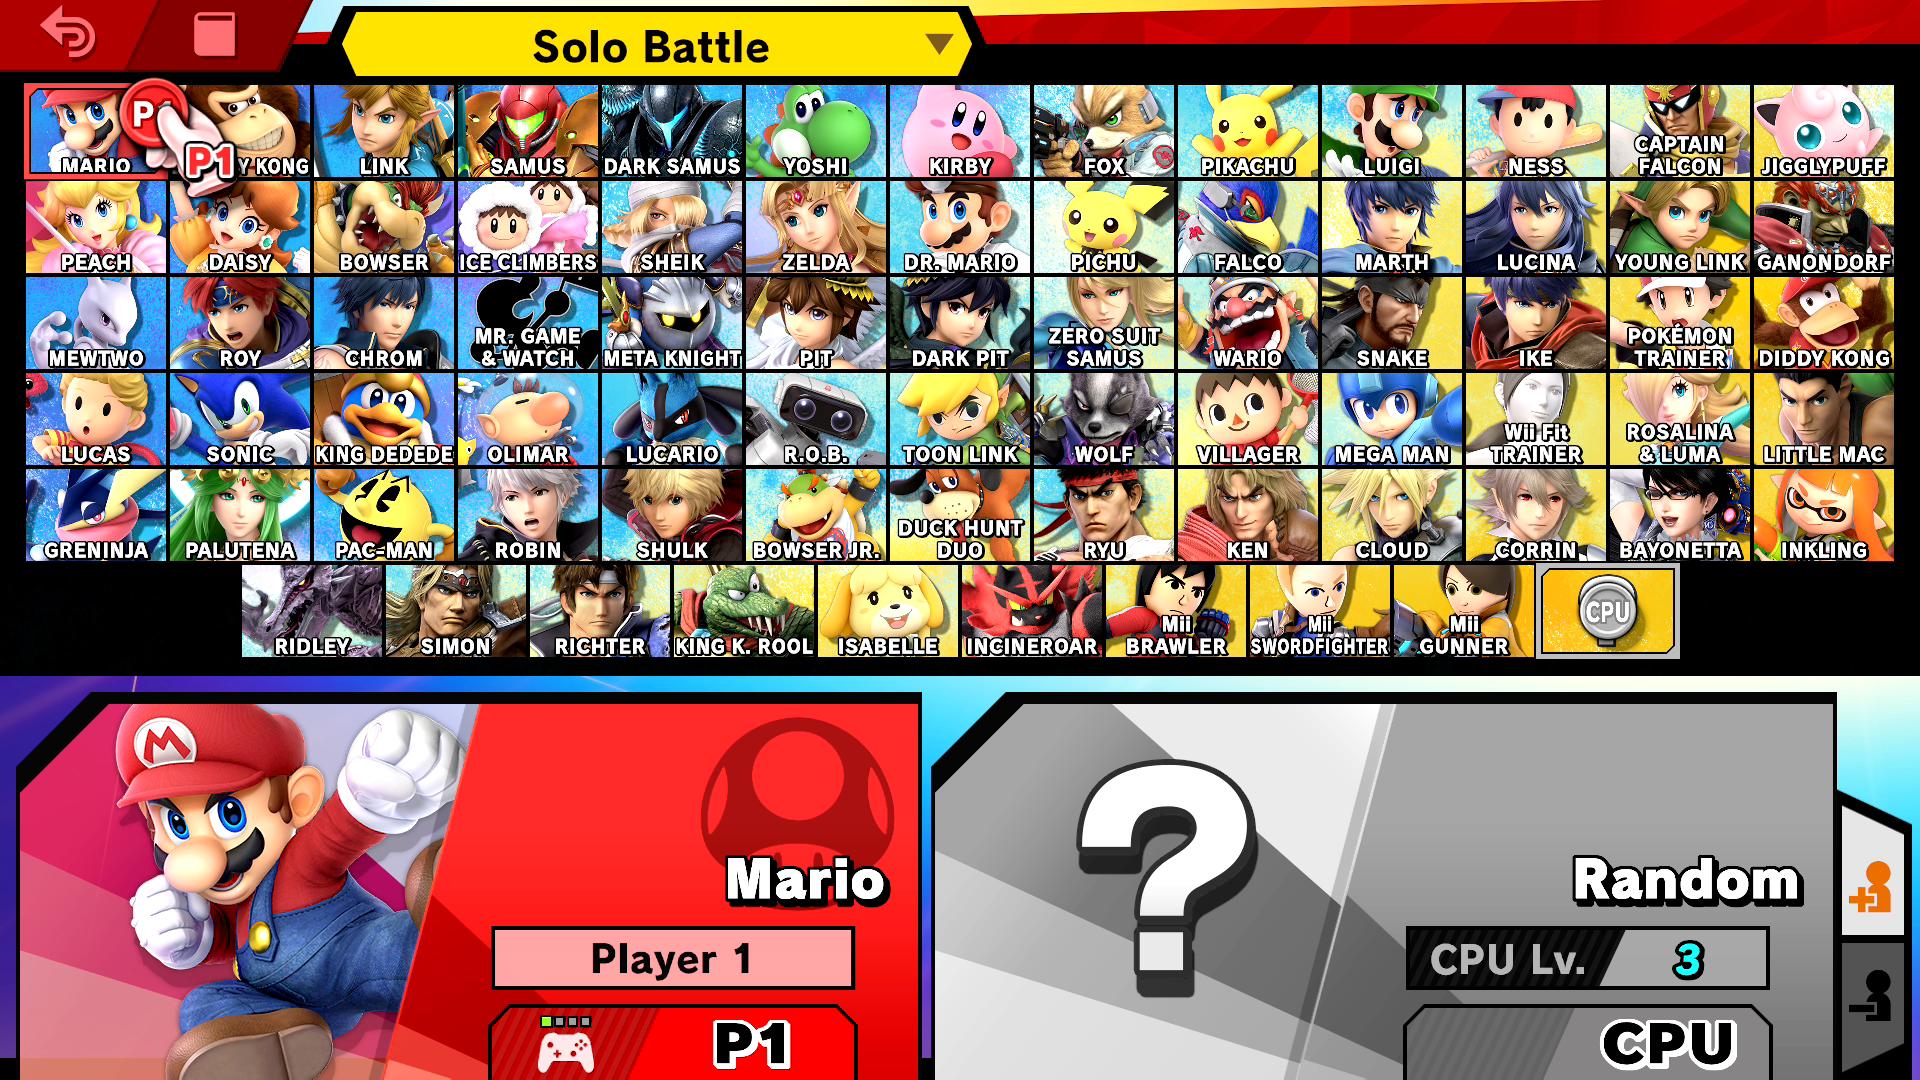 How do i unlock characters in super smash bros ultimate 7tndxdigvz086m